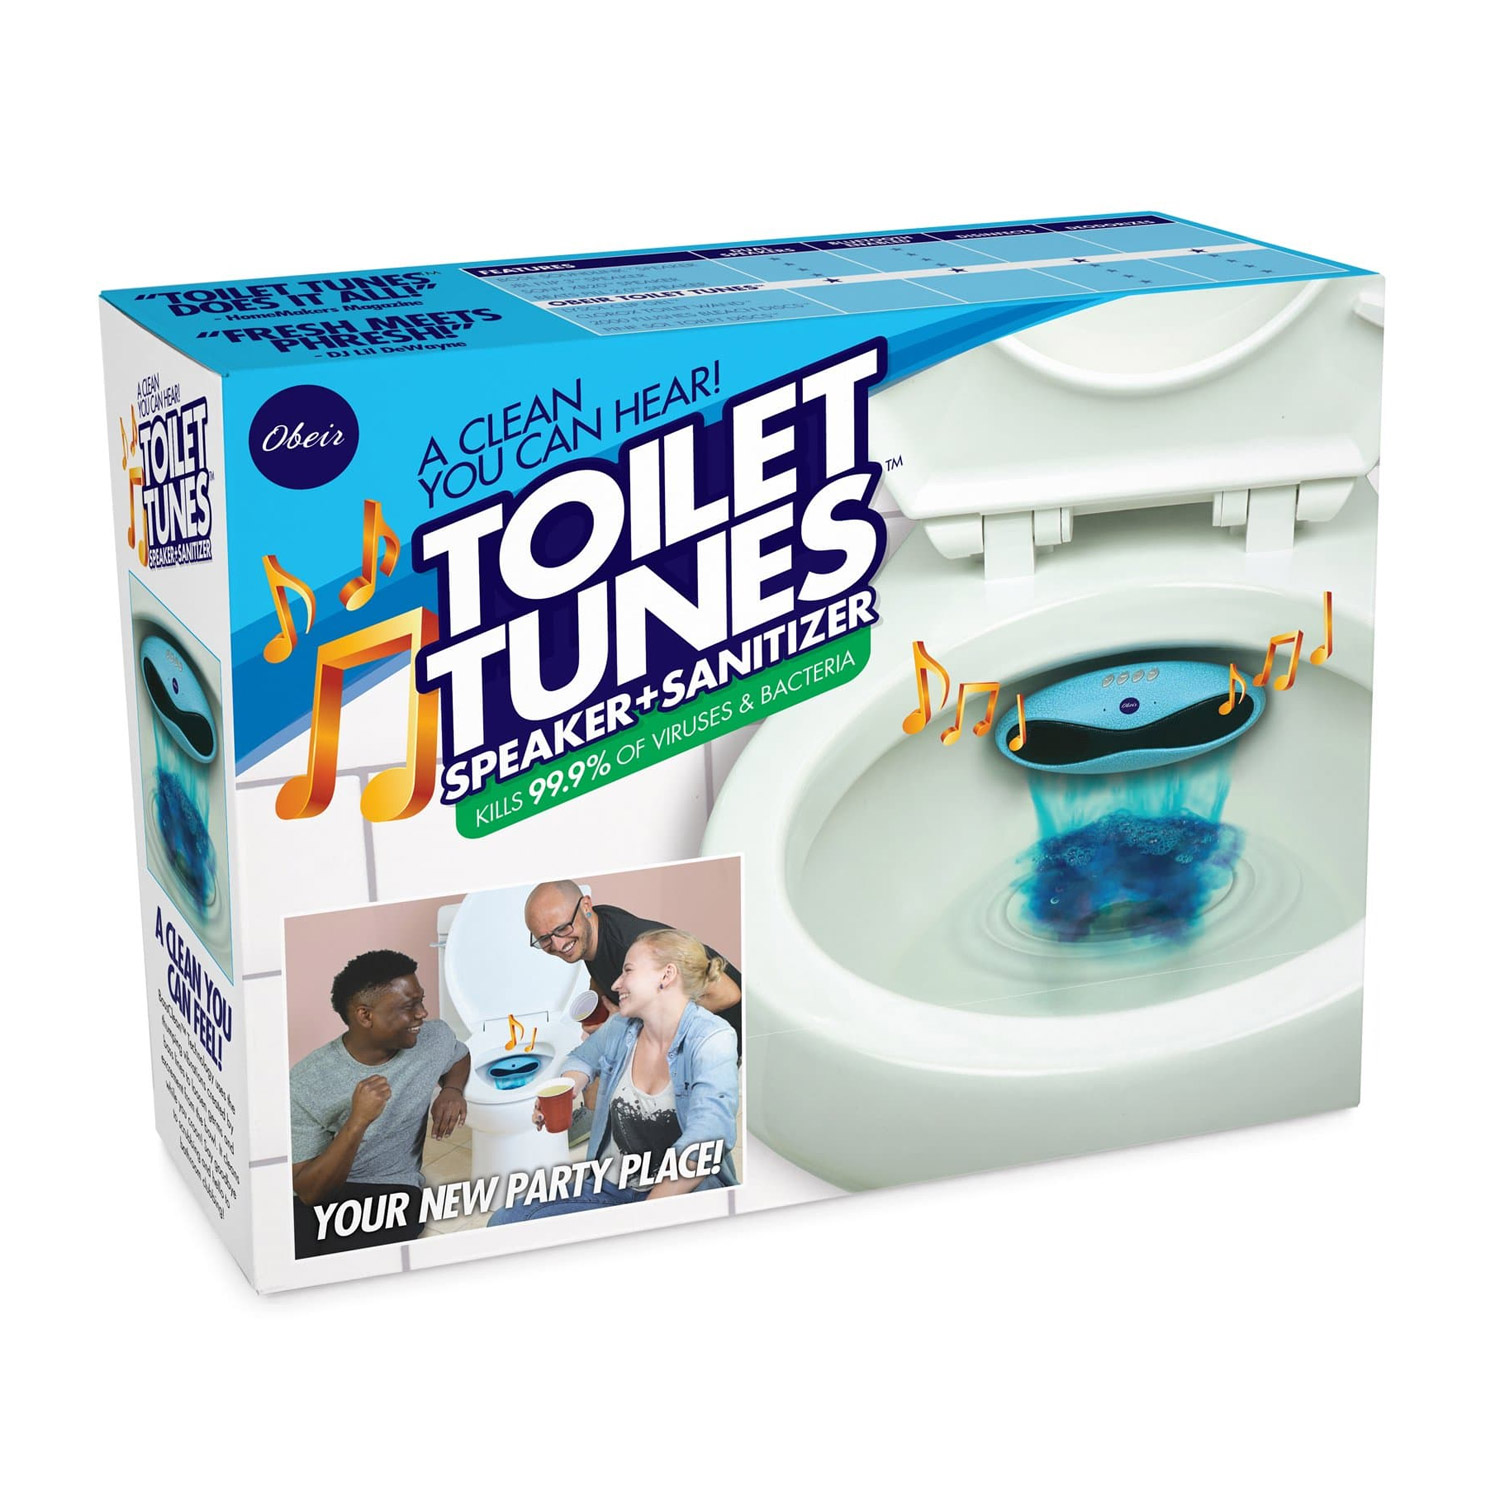 There's Now a Bluetooth Toilet Speaker That Doubles as a Toilet Sanitizer